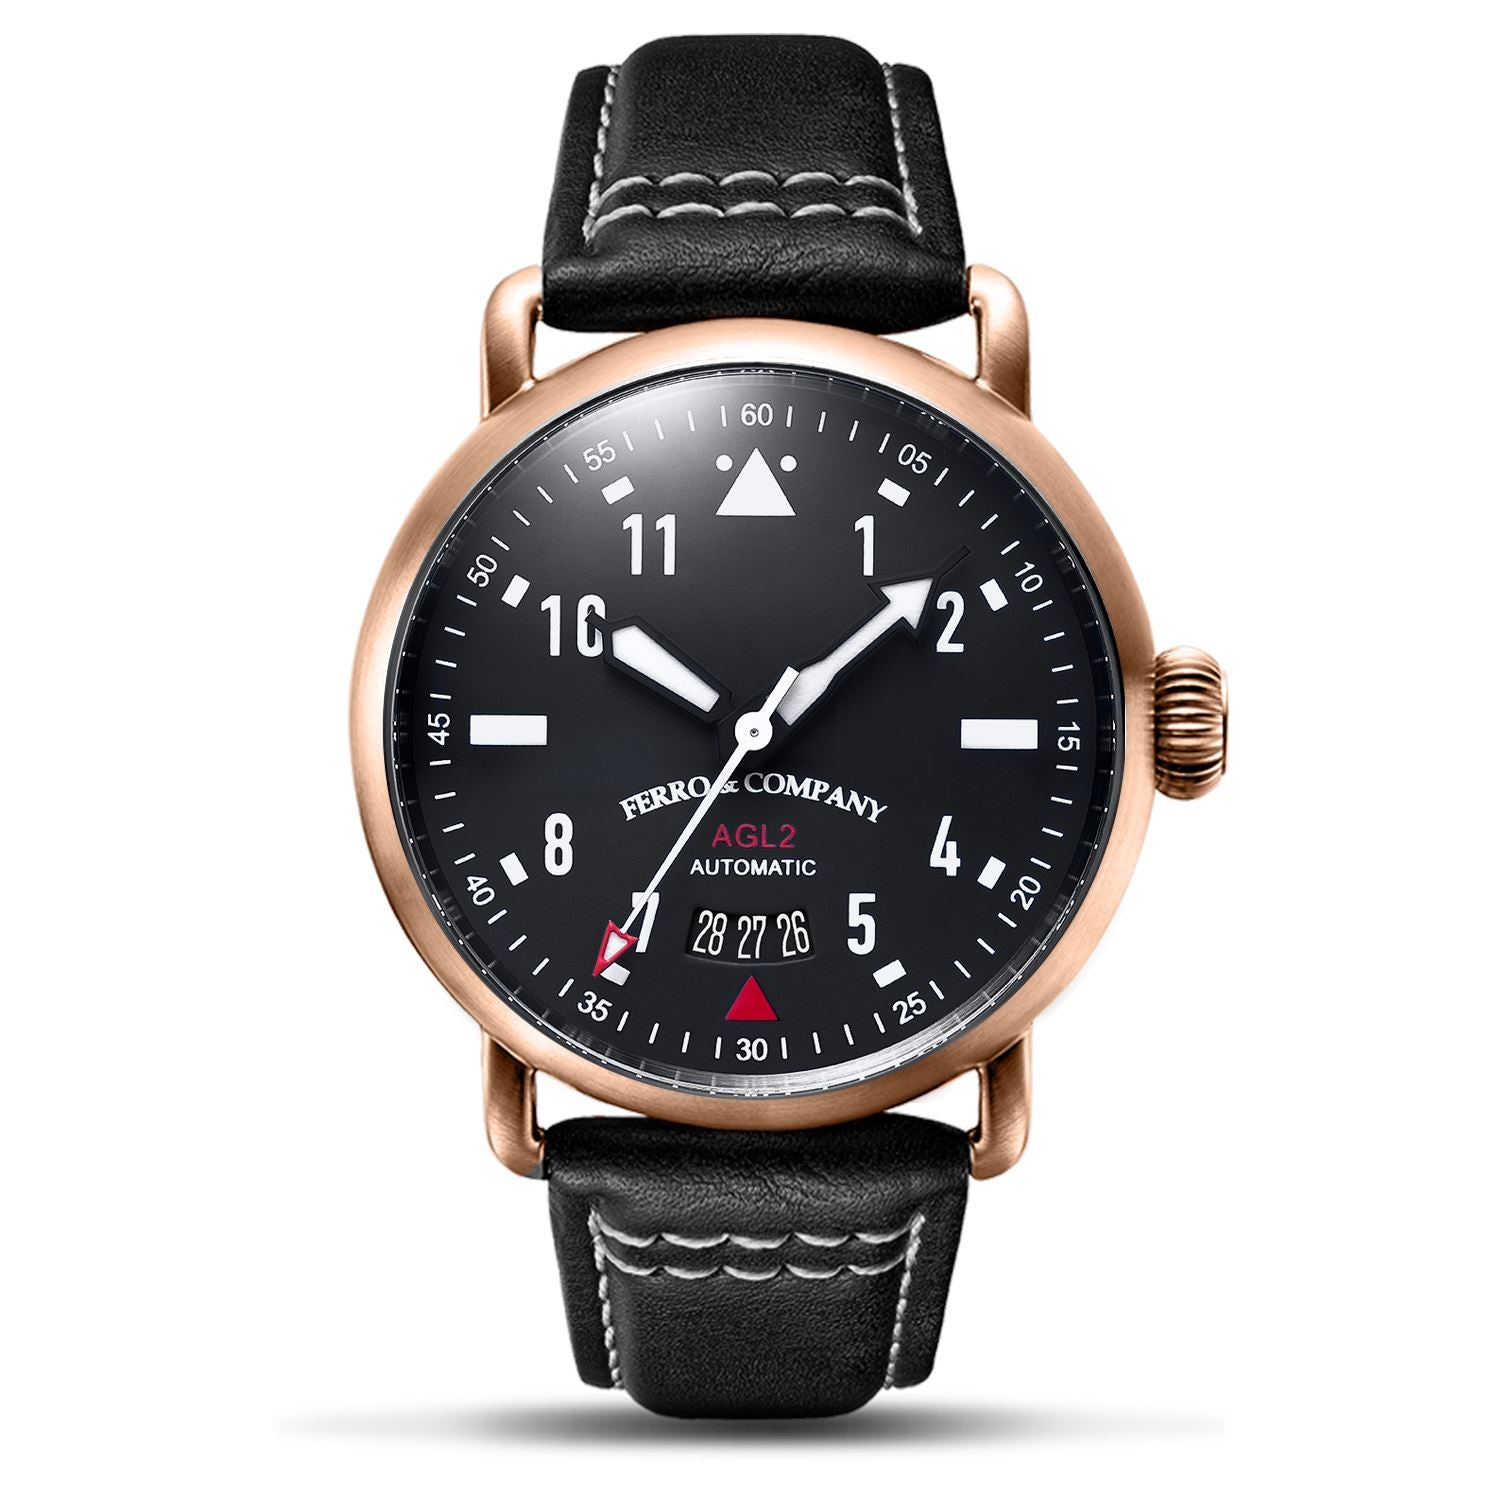 Ferro Watches AGL 2 Vintage style Pilot Watch Black Rose Gold - Ferro &amp; Company Watches